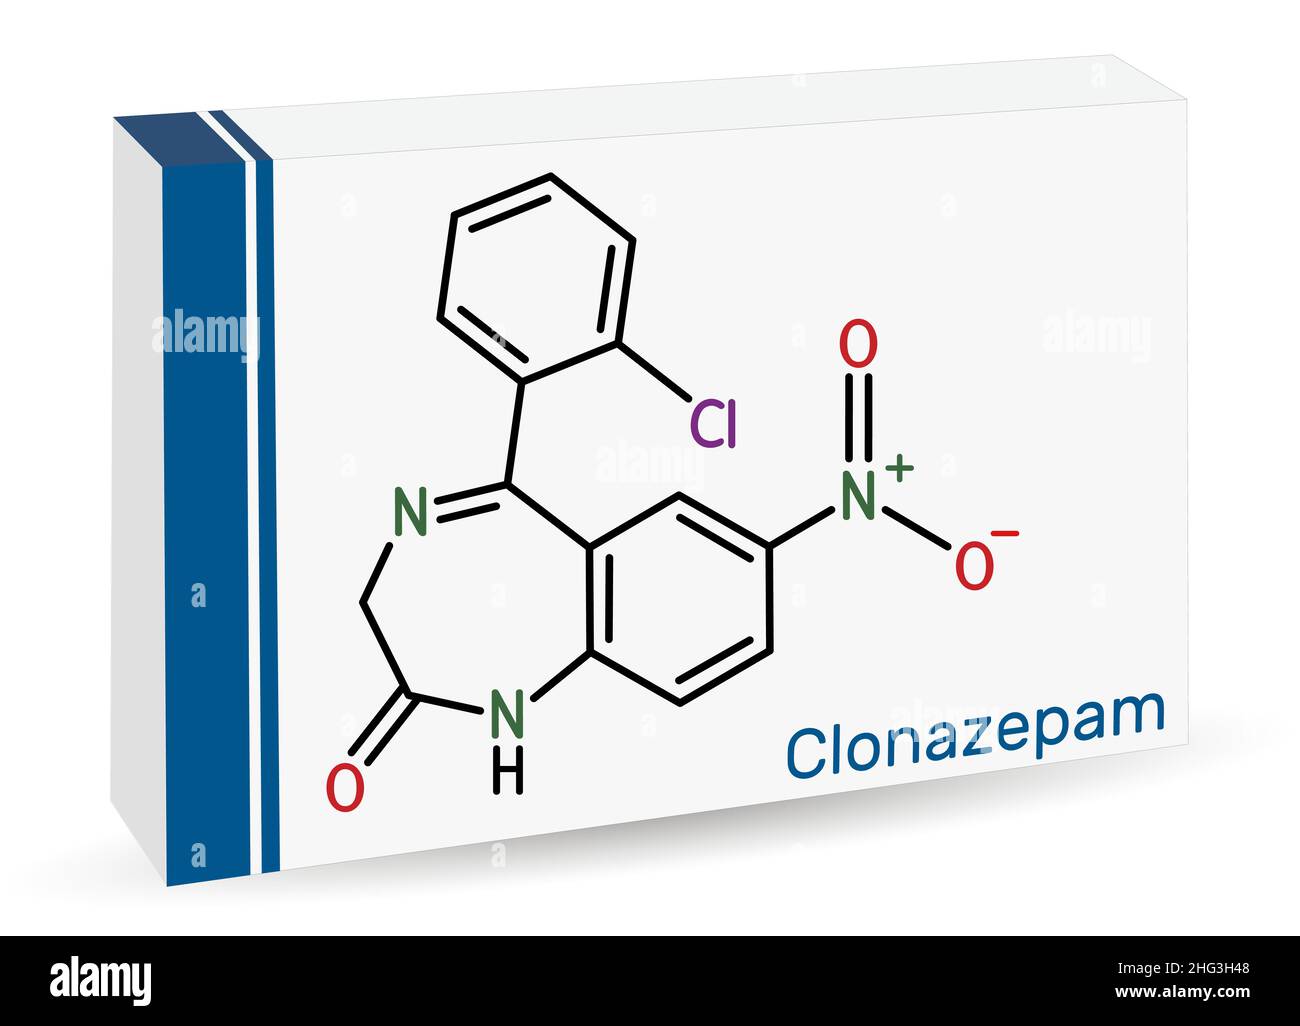 Clonazepam molecule. It is benzodiazepine, anticonvulsant, used to treat panic disorders, severe anxiety, seizures. Skeletal chemical formula. Paper p Stock Vector